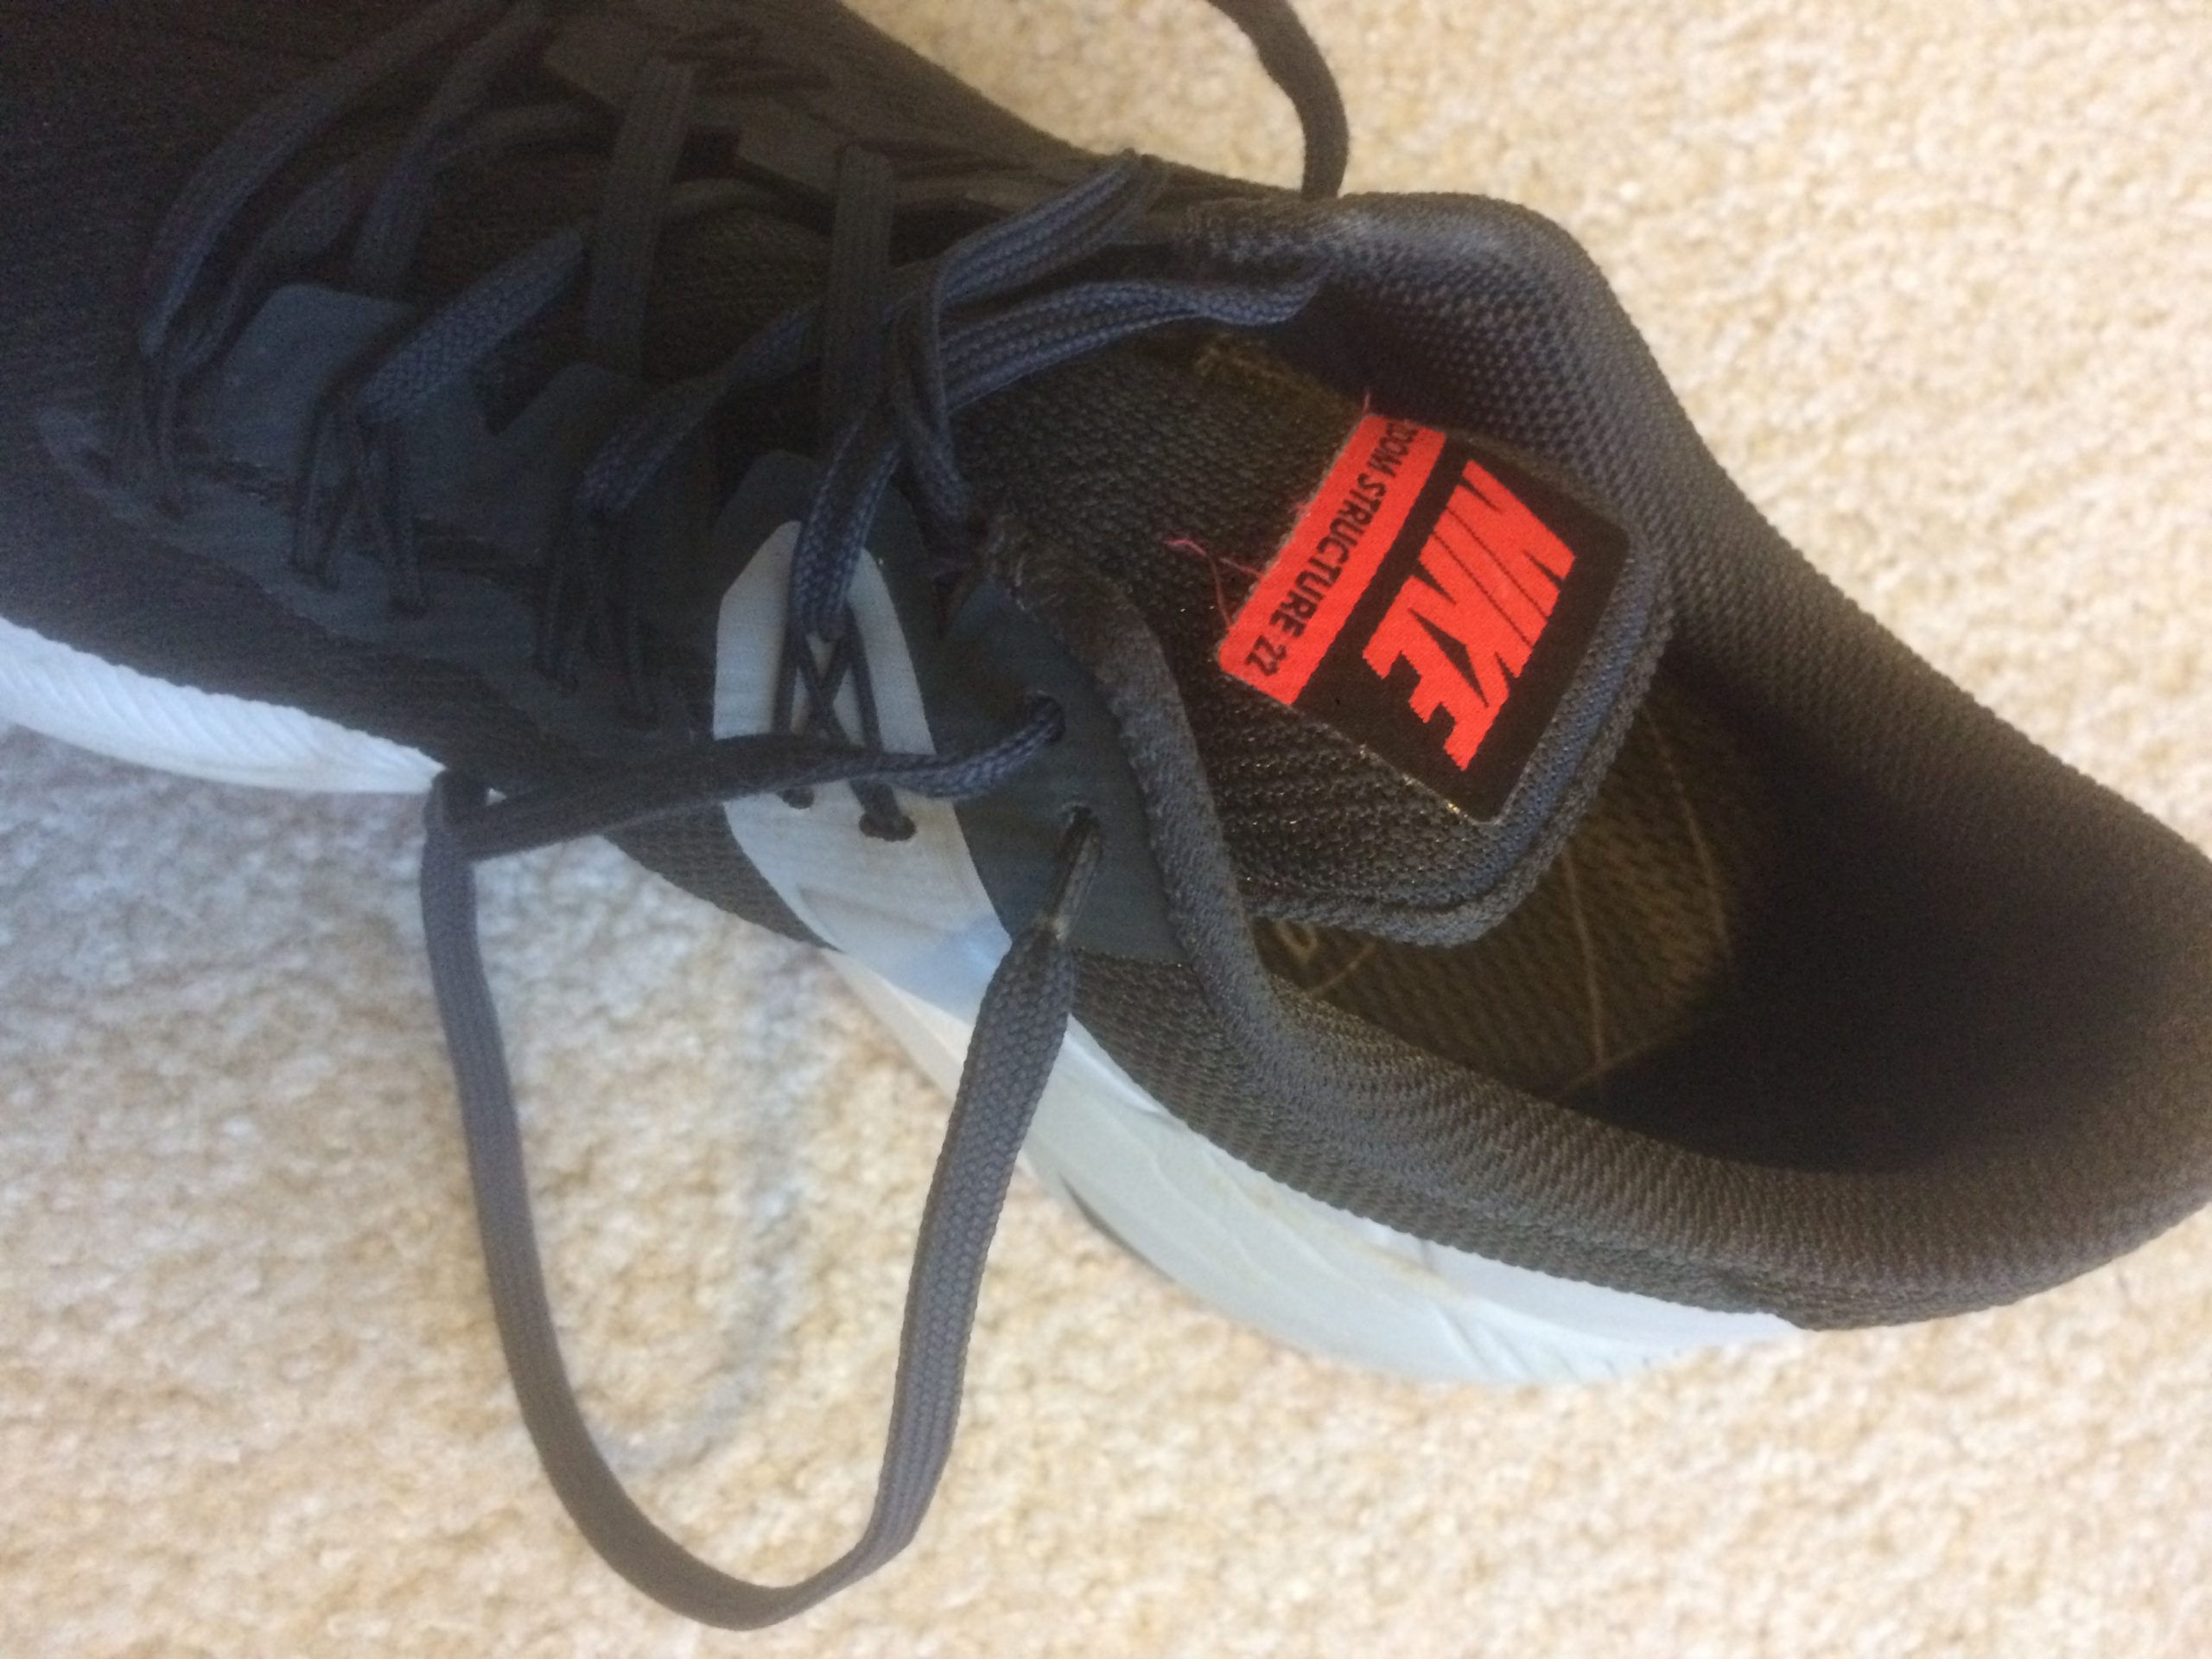 Heel Lock Knot: Perfecting Your Shoe Fit - The Optimal Runner